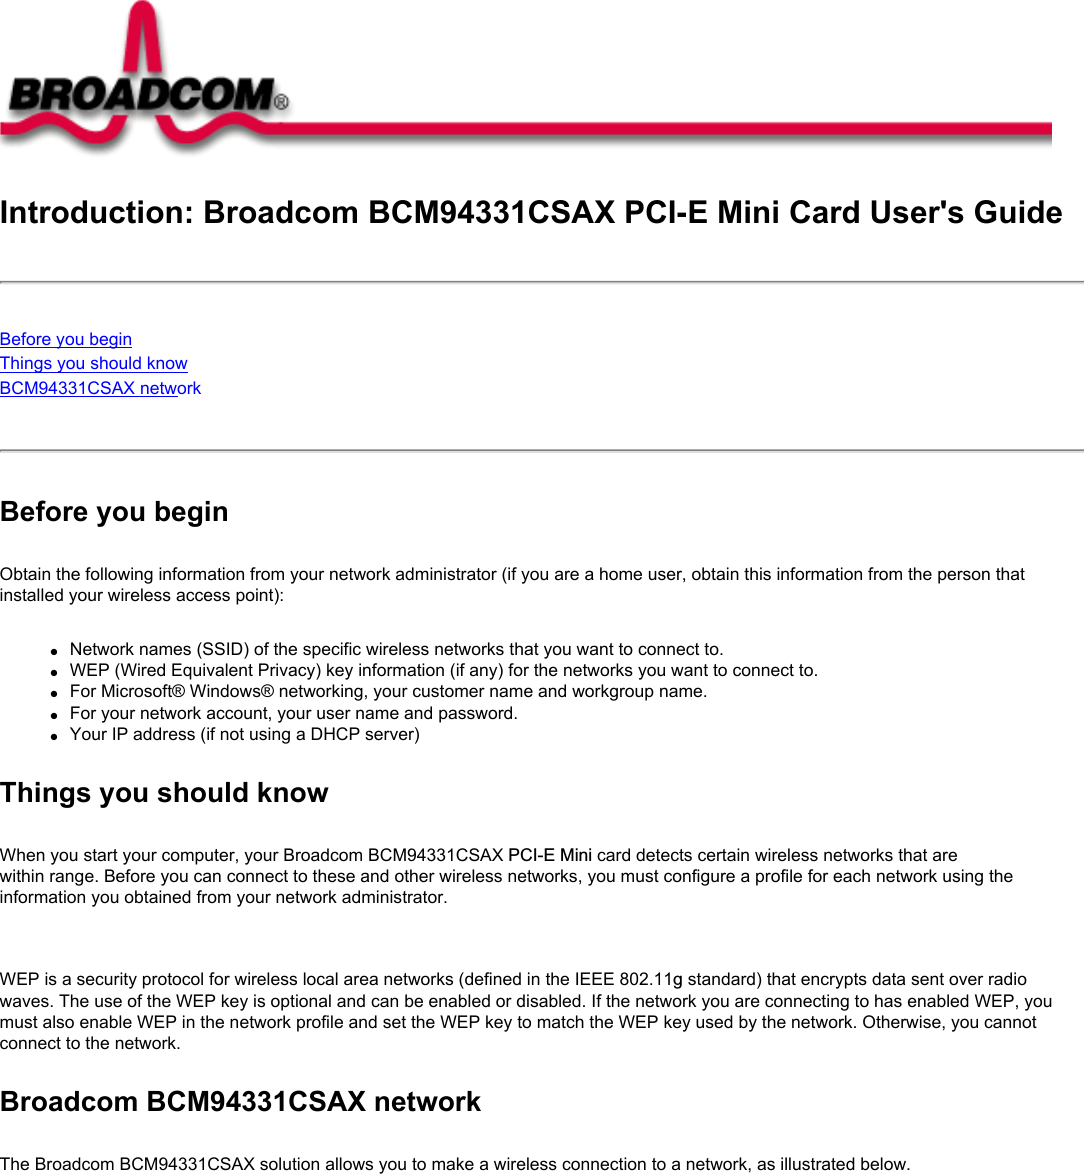 Introduction: Broadcom BCM94331CSAX PCI-E Mini Card User&apos;s GuideBefore you beginThings you should knowBCM94331CSAX network Before you beginObtain the following information from your network administrator (if you are a home user, obtain this information from the person that installed your wireless access point):●     Network names (SSID) of the specific wireless networks that you want to connect to.●     WEP (Wired Equivalent Privacy) key information (if any) for the networks you want to connect to.●     For Microsoft® Windows® networking, your customer name and workgroup name.●     For your network account, your user name and password.●     Your IP address (if not using a DHCP server)Things you should knowWhen you start your computer, your Broadcom BCM94331CSAX PCI-E Mini card detects certain wireless networks that are within range. Before you can connect to these and other wireless networks, you must configure a profile for each network using the information you obtained from your network administrator.   WEP is a security protocol for wireless local area networks (defined in the IEEE 802.11g standard) that encrypts data sent over radio waves. The use of the WEP key is optional and can be enabled or disabled. If the network you are connecting to has enabled WEP, you must also enable WEP in the network profile and set the WEP key to match the WEP key used by the network. Otherwise, you cannot connect to the network.Broadcom BCM94331CSAX networkThe Broadcom BCM94331CSAX solution allows you to make a wireless connection to a network, as illustrated below.